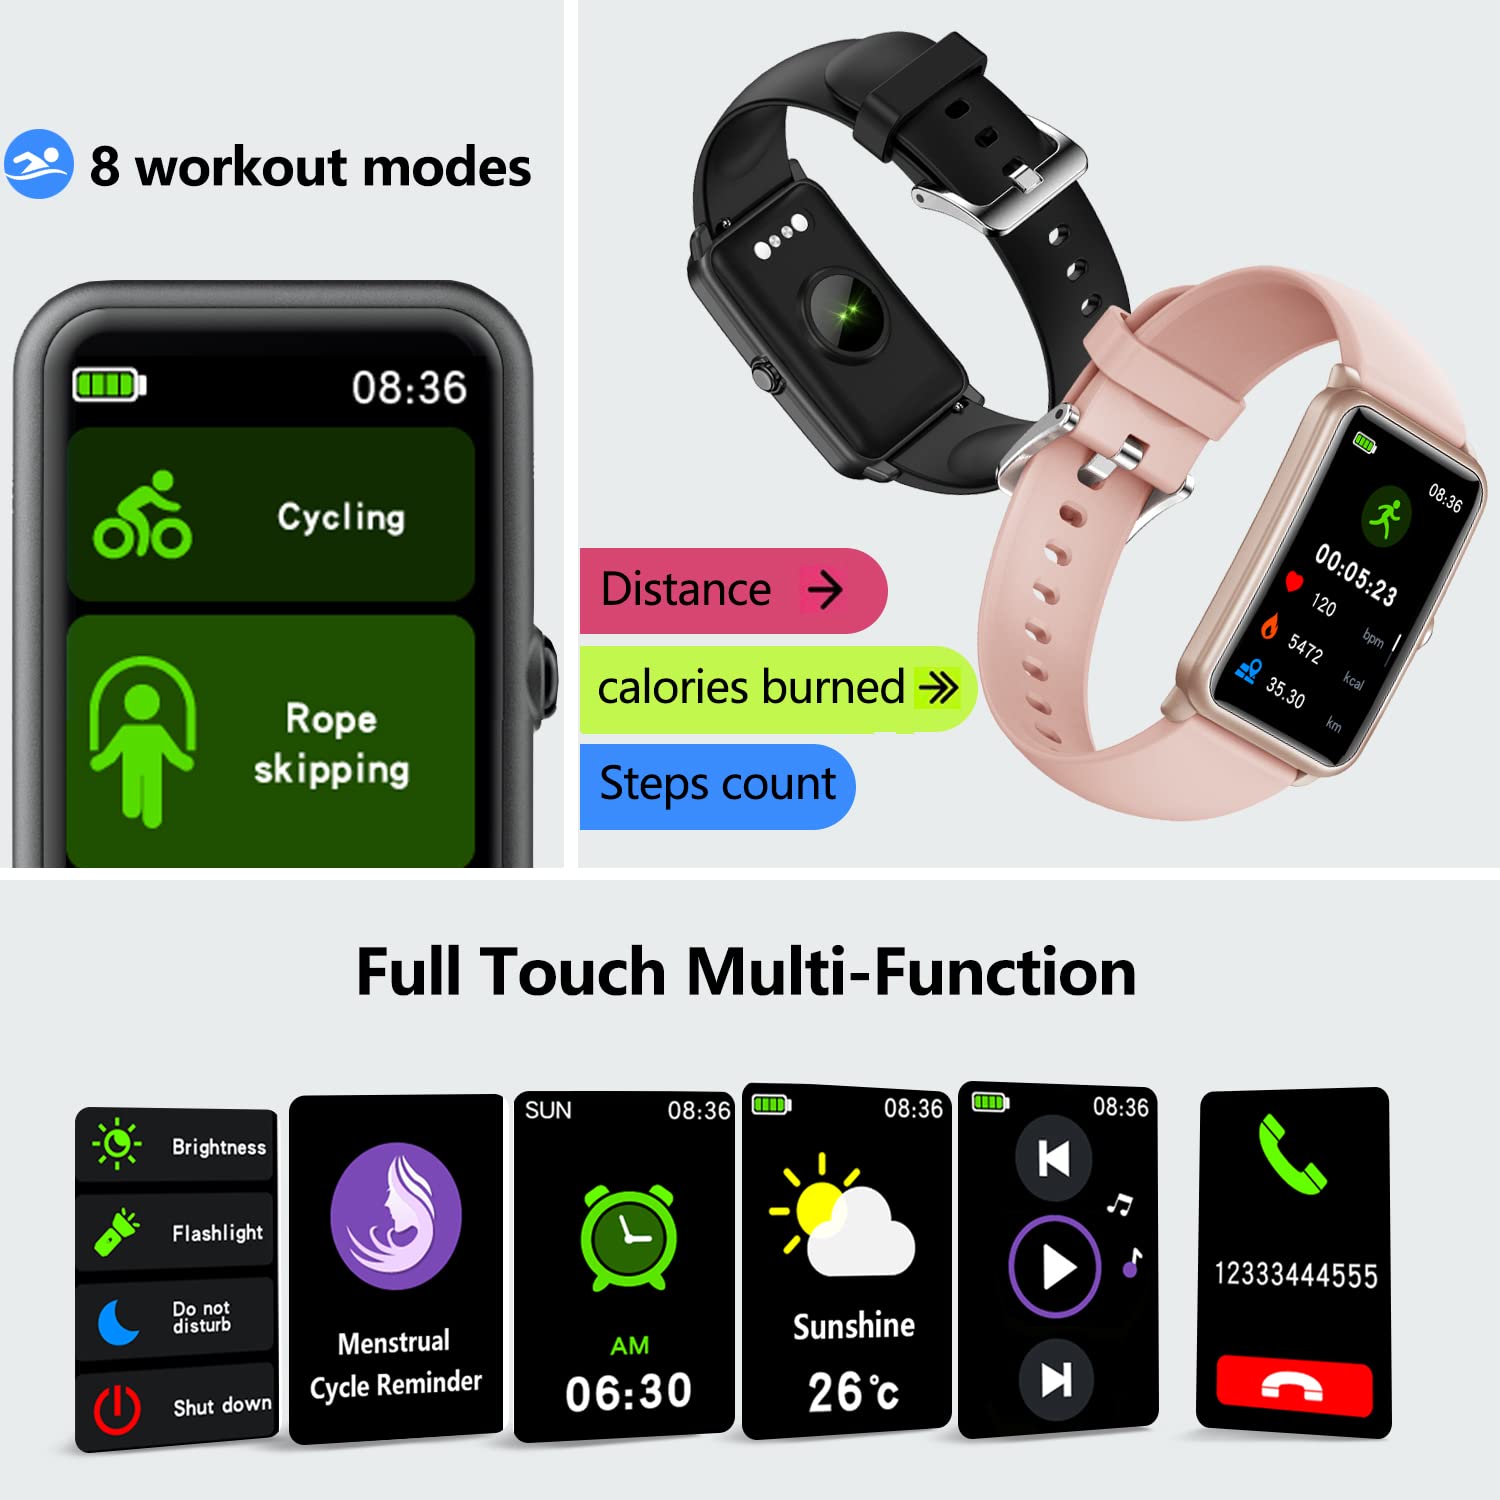 FITVII Fitness Tracker, Heart Rate Blood Pressure Monitor Activity Tracker, 1.57'' Touch Screen Calorie Step Counter IP68 Waterproof Watch with Weather Sleep Monitor Music Control for Women Men Kids